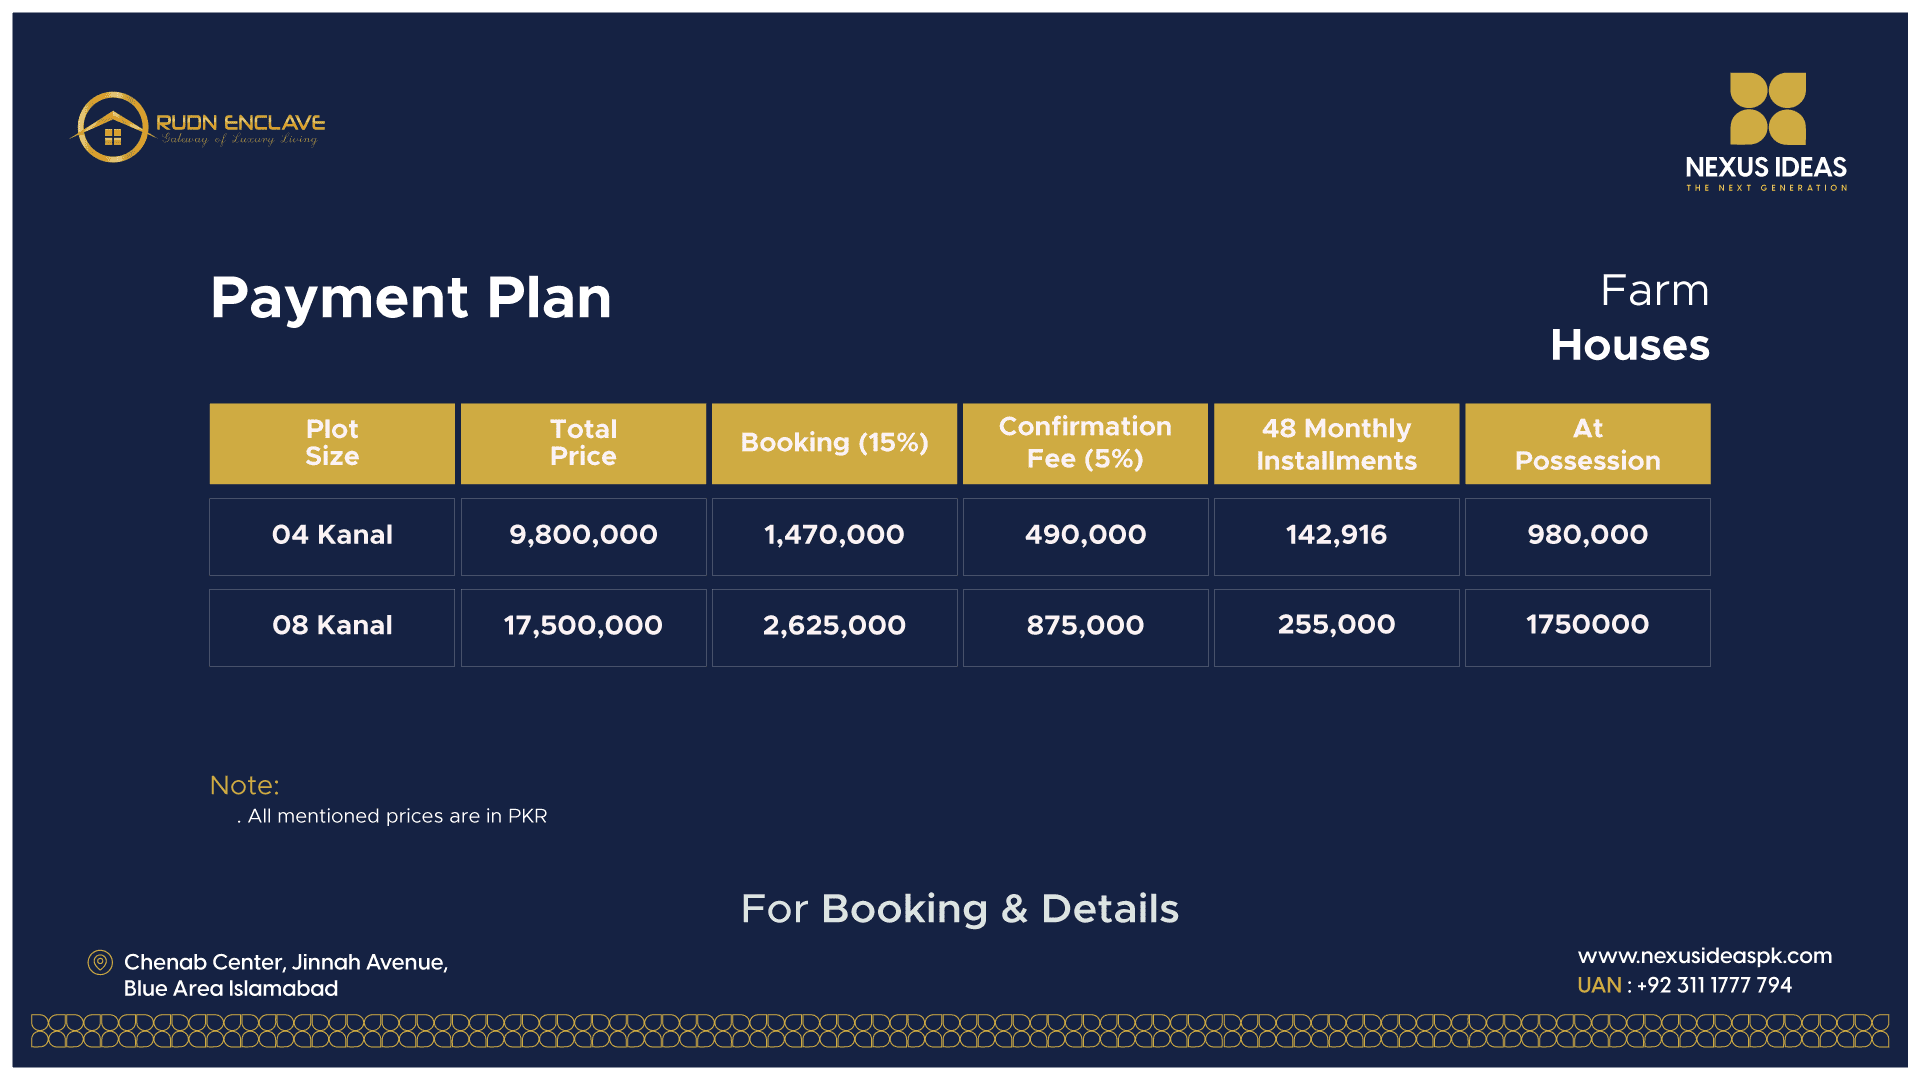 Rudn Enclave islamabad farm house payment plan